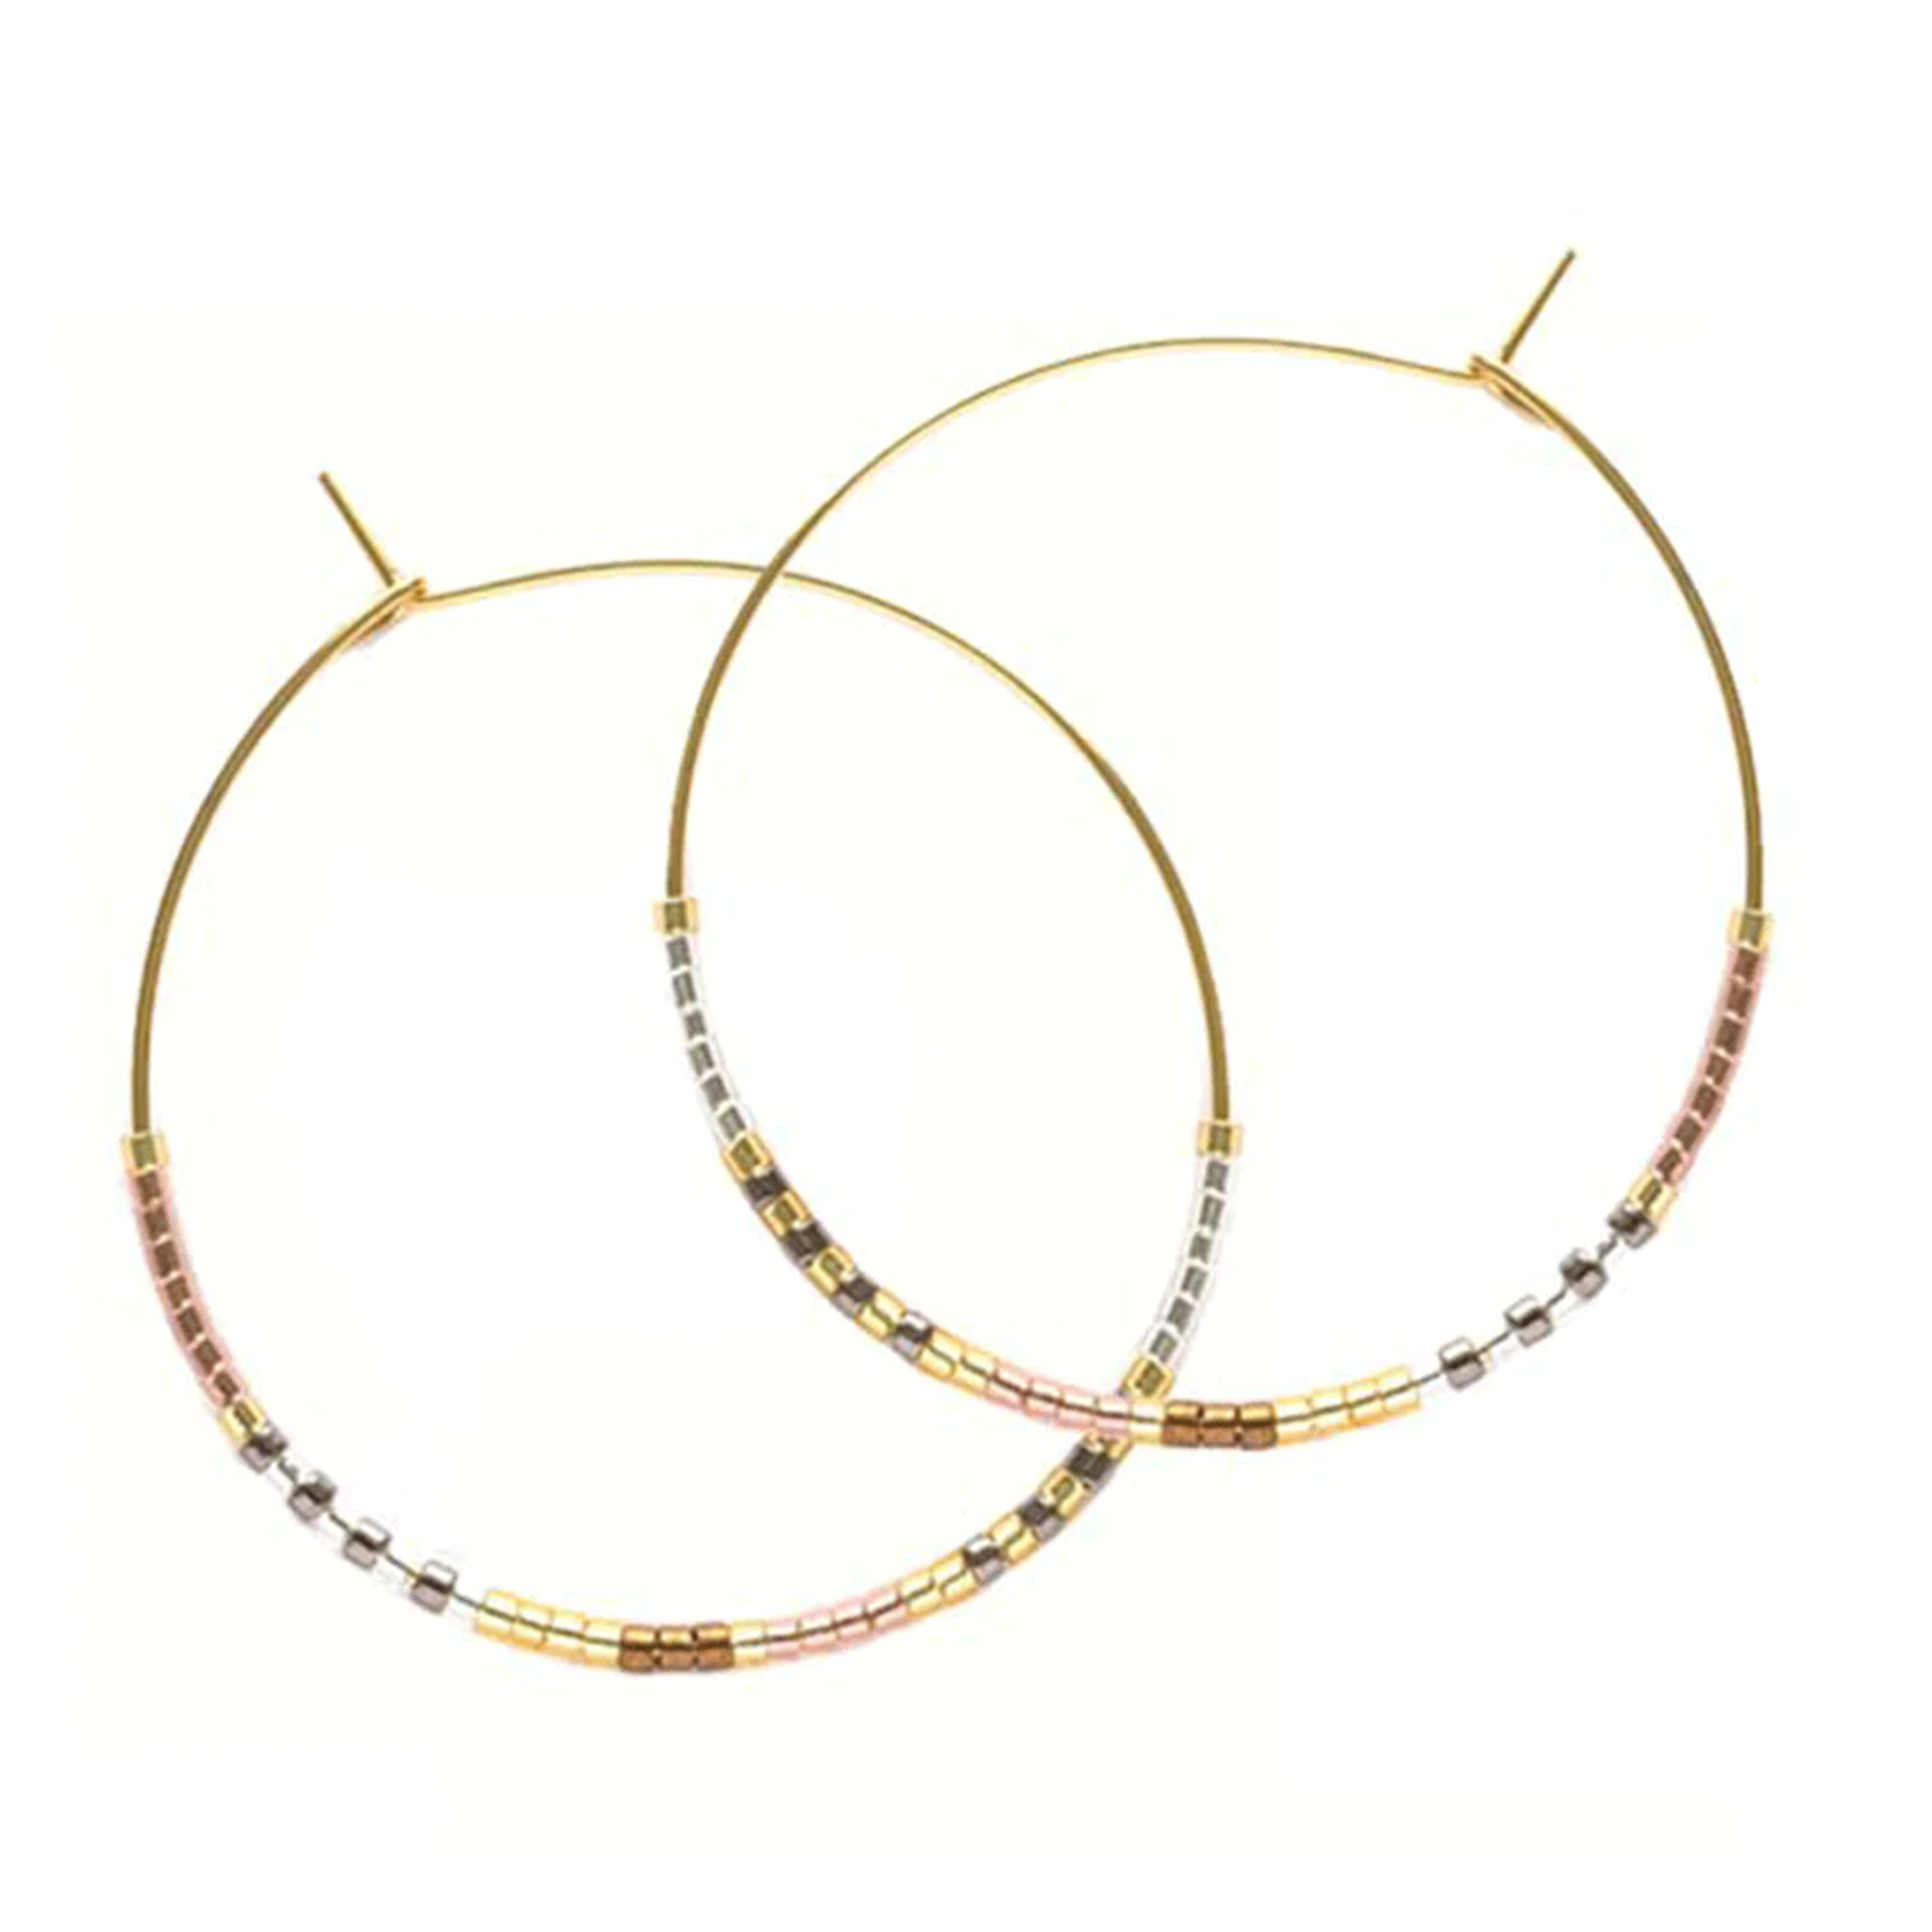 A pair of gold thin hoop earrings with neutral colored beads on the bottom half of it. 